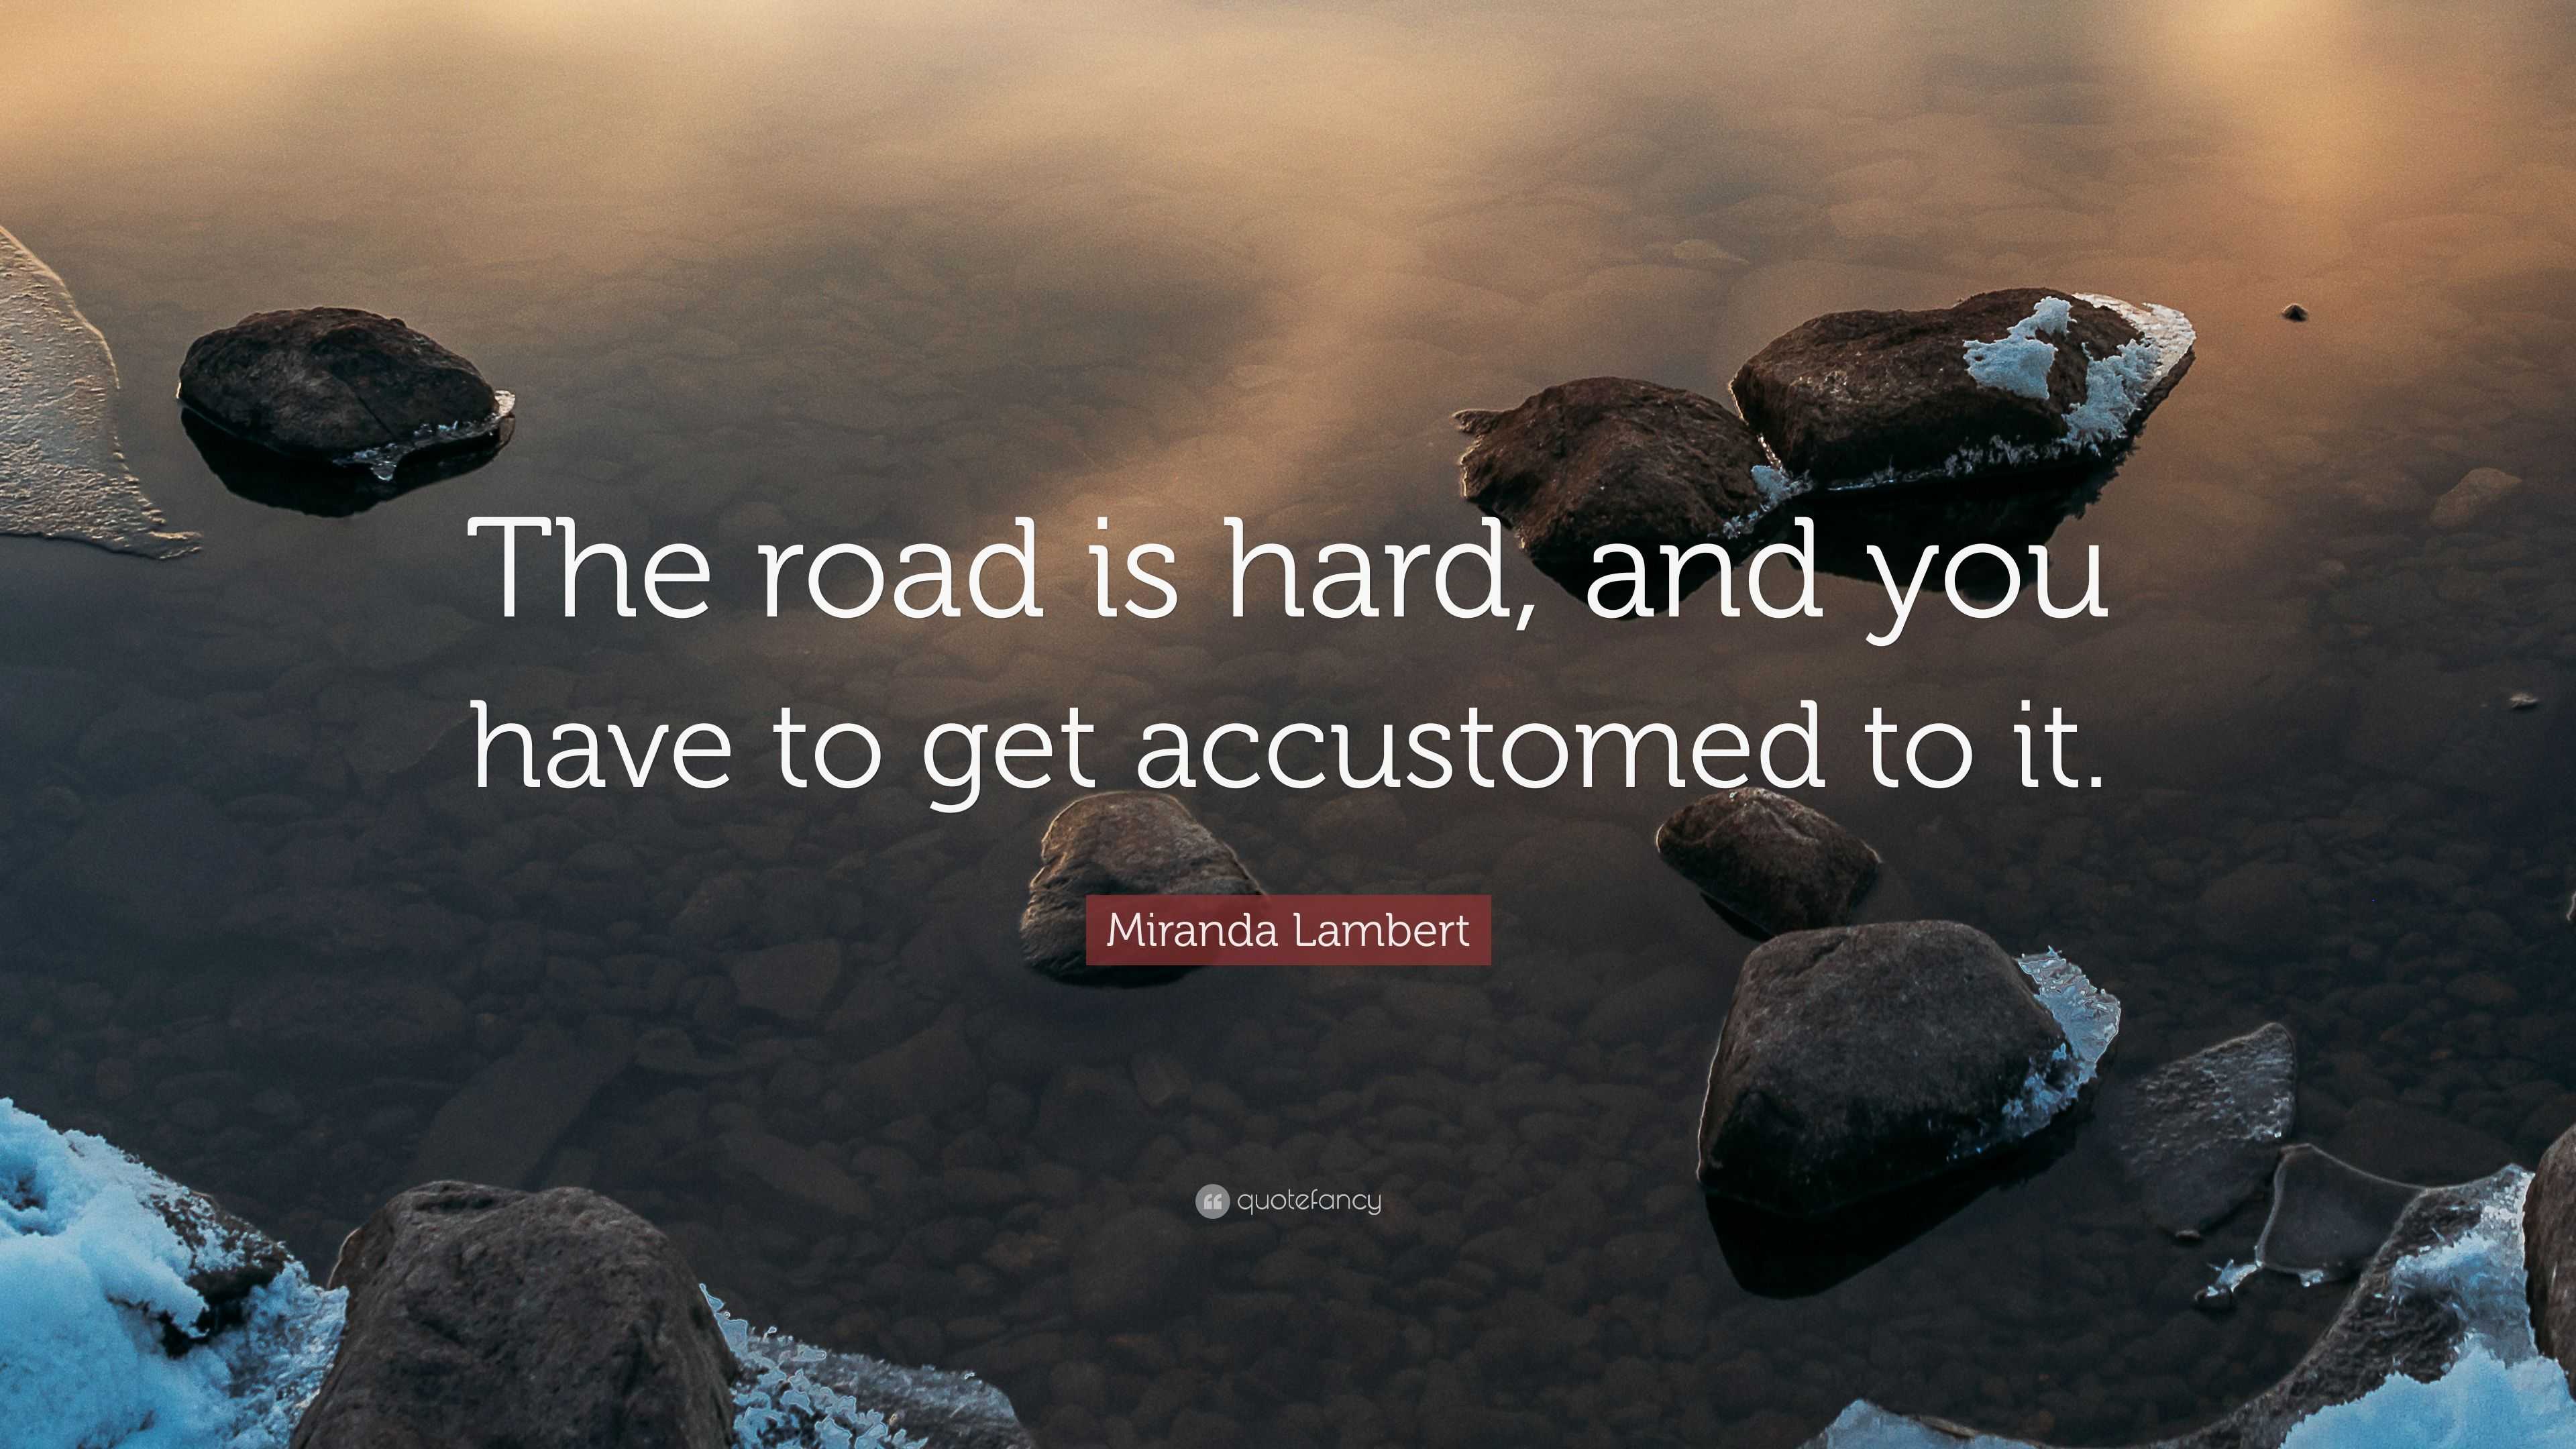 Miranda Lambert Quote: The road is hard and you have to get